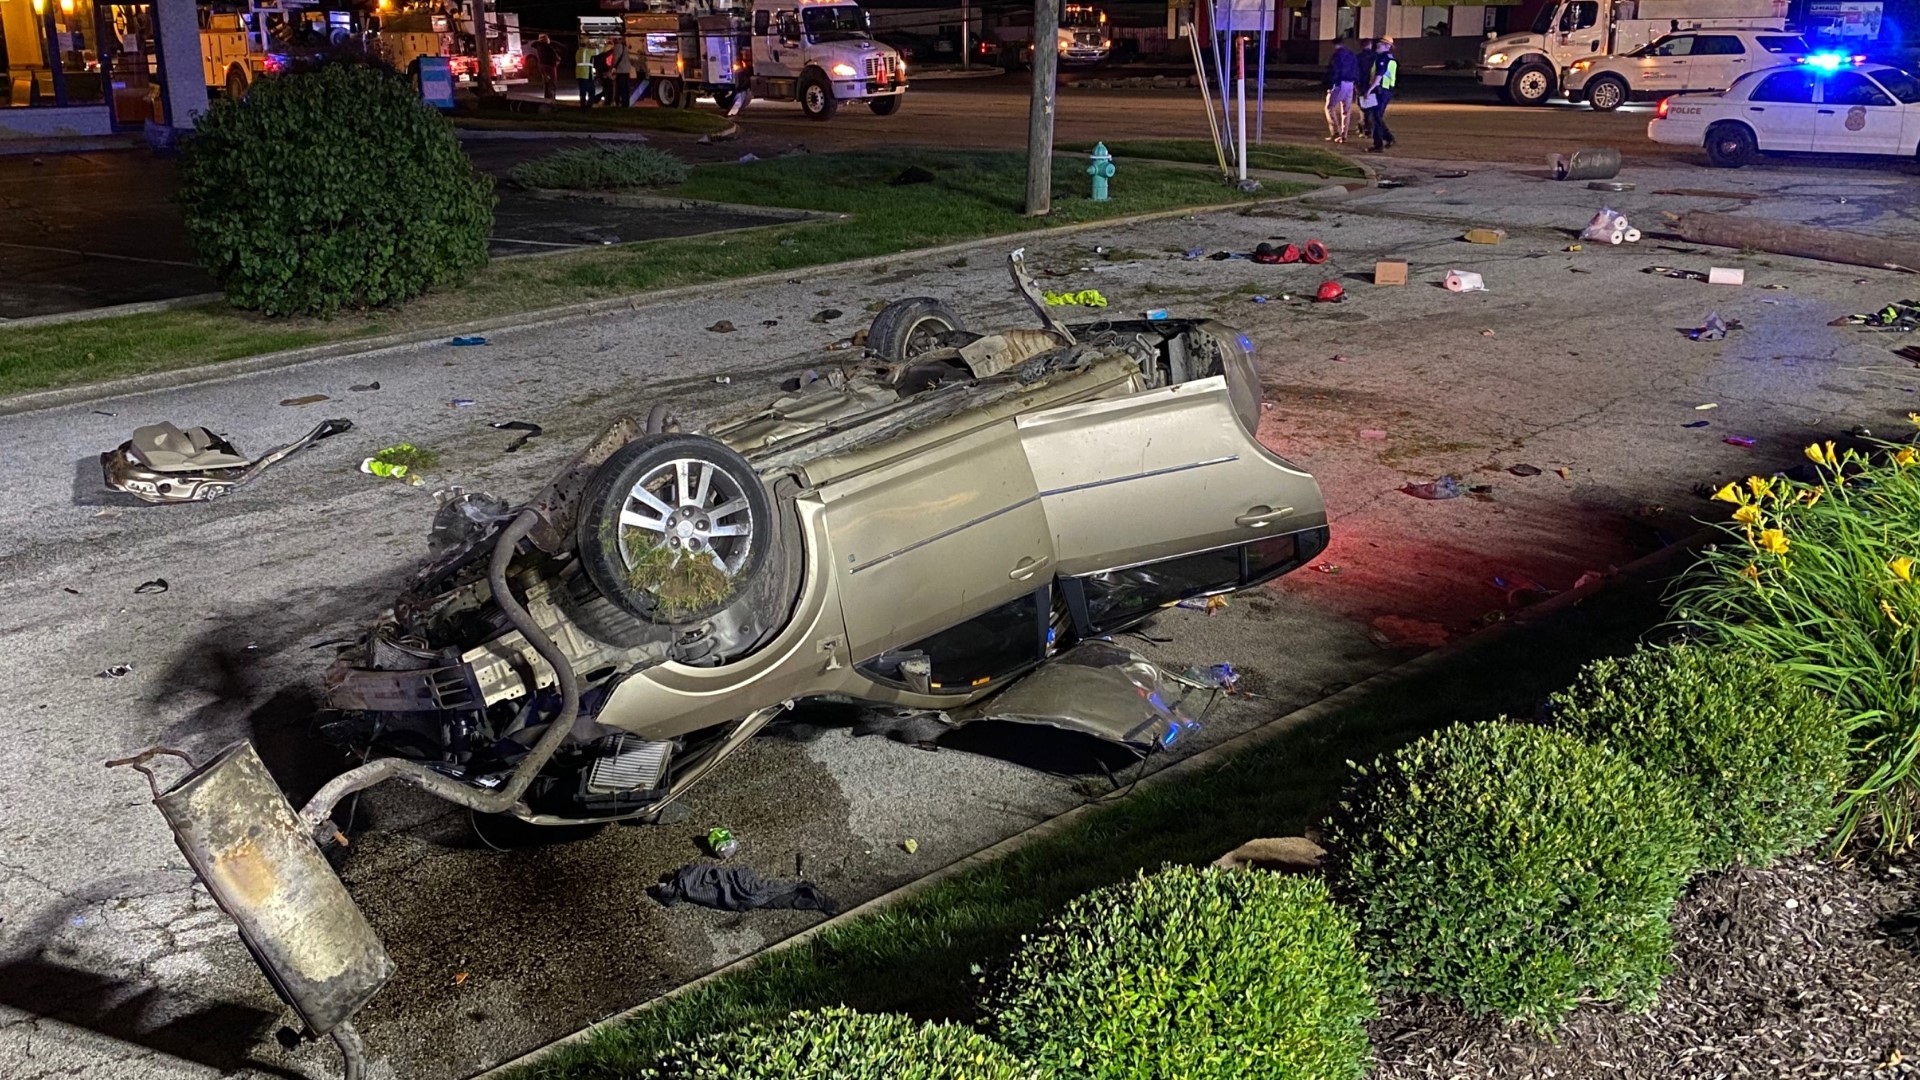 The crash happened Friday around 2 a.m. at the intersection of East Washington Street and Burbank Road.